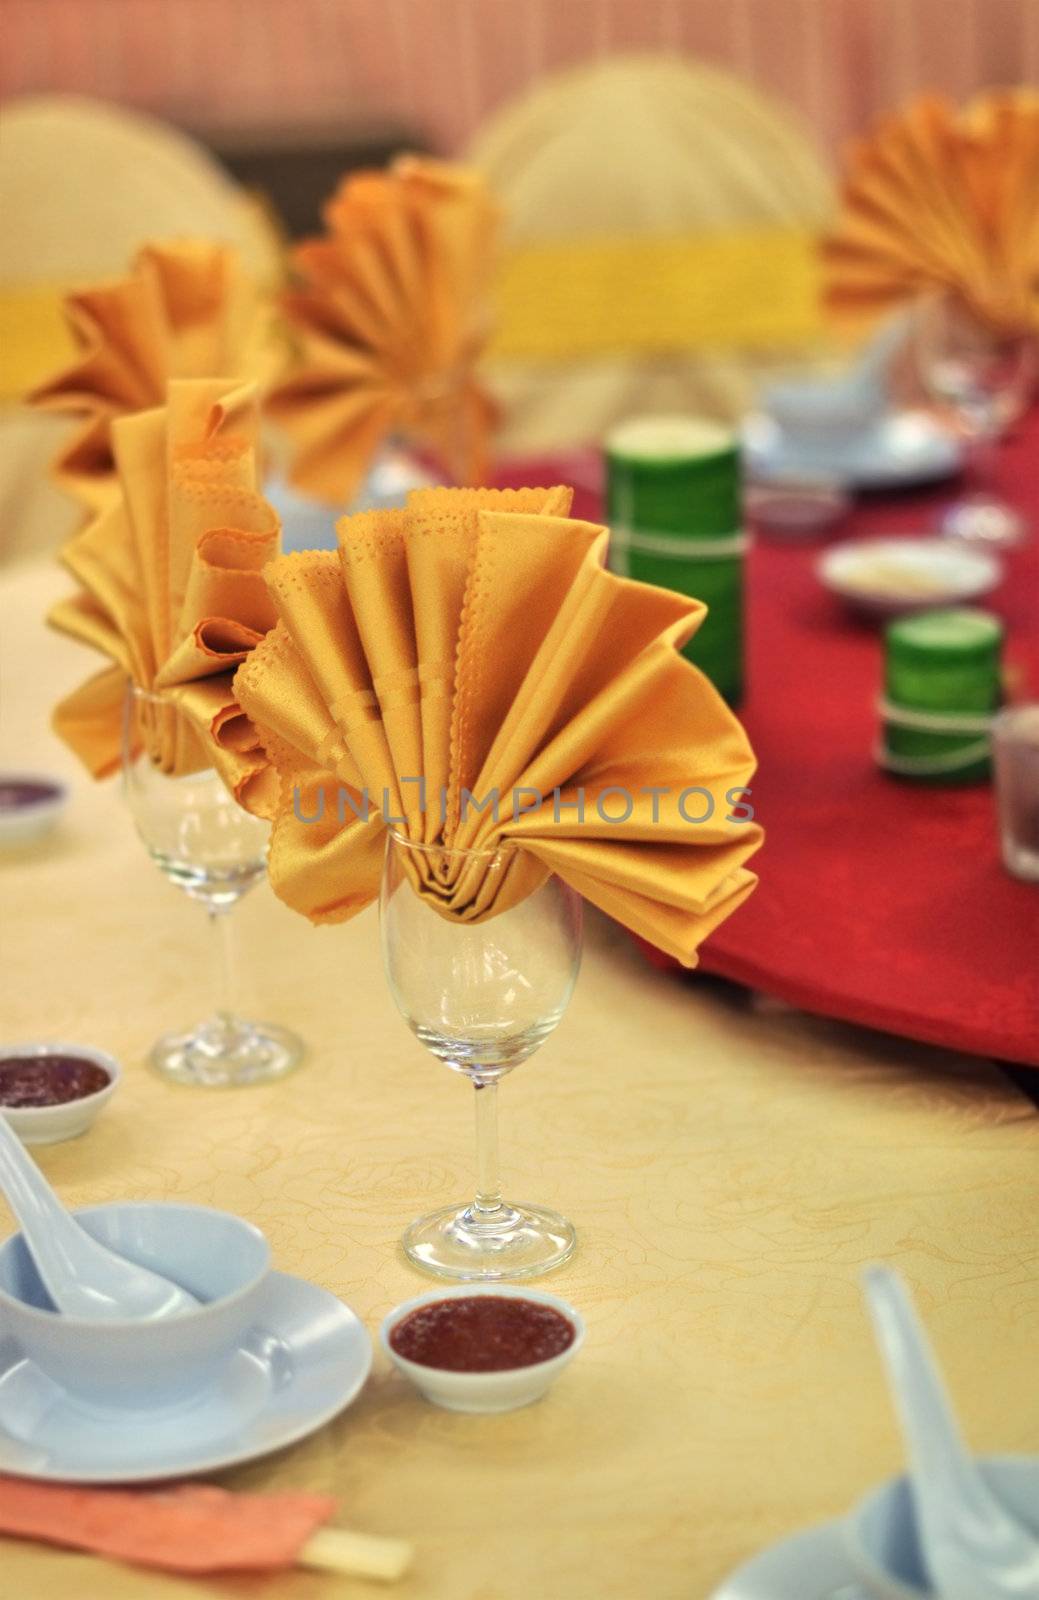 Banquet wedding table setting, shallow depth of field